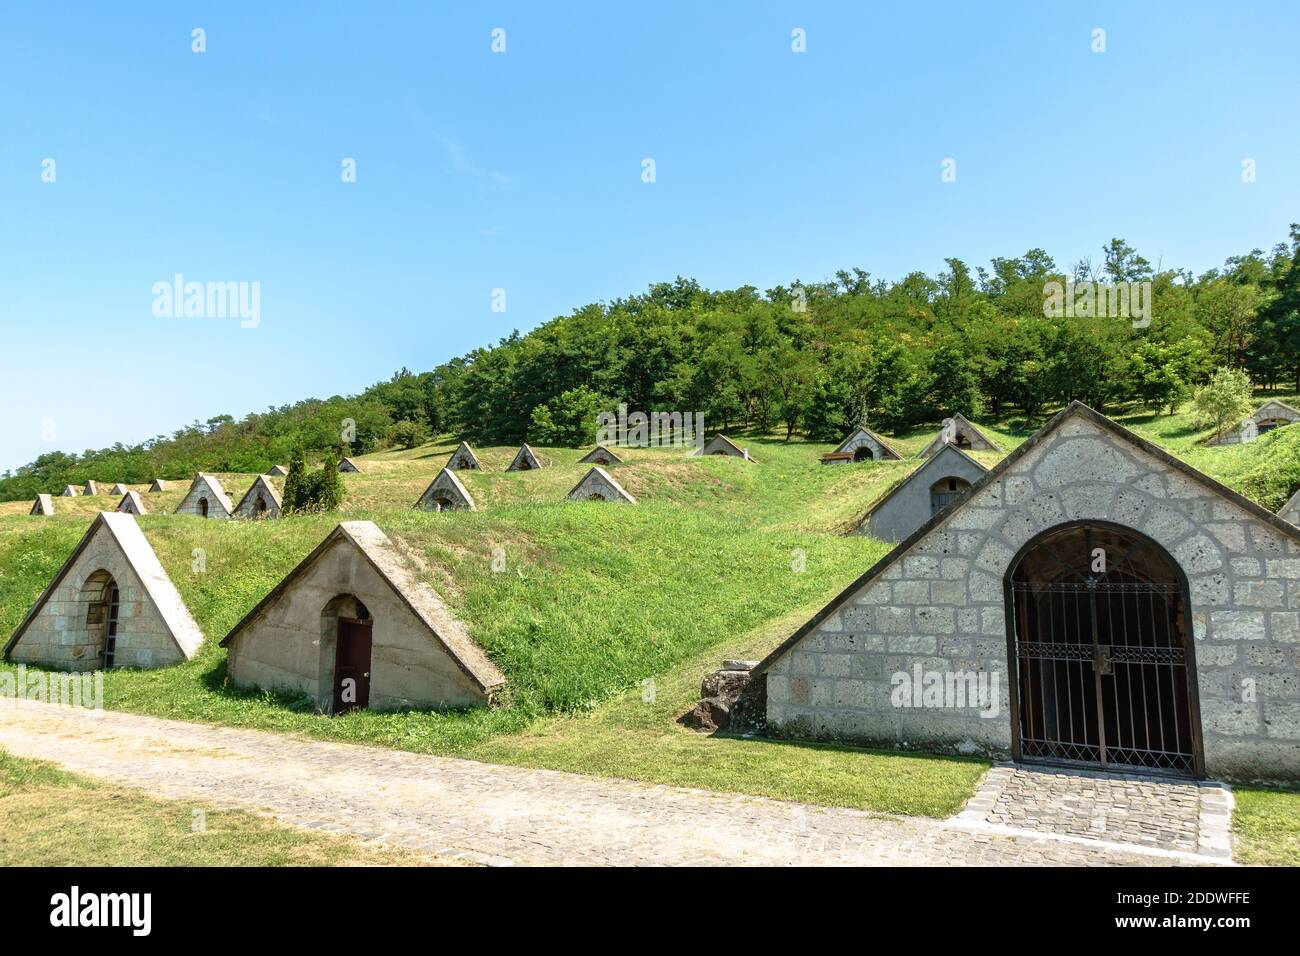 The Gombos-hegyi wine cellars in northern Hungary Stock Photo